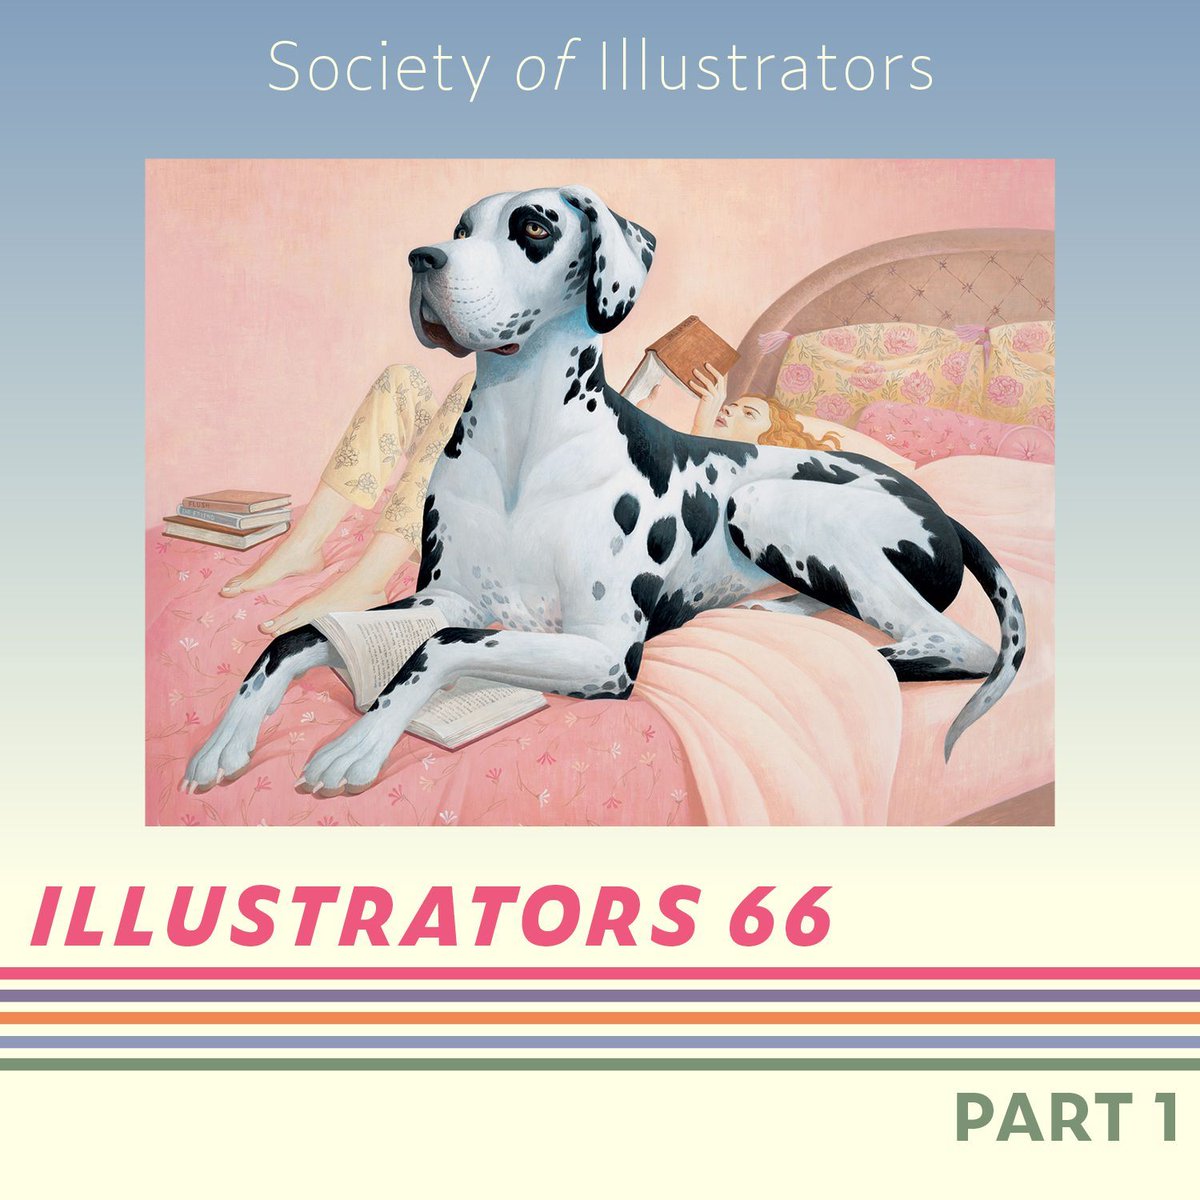 Join us for the Awards Ceremony and Reception for Illustrators 66: Part I, featuring works in Advertising, Institutional, Uncommissioned, Surface + Product Design, and Animation Categories. Friday, March 1 @5:30pm. Tickets + info: bit.ly/3UtLoMh Artwork by Jody Hewgill